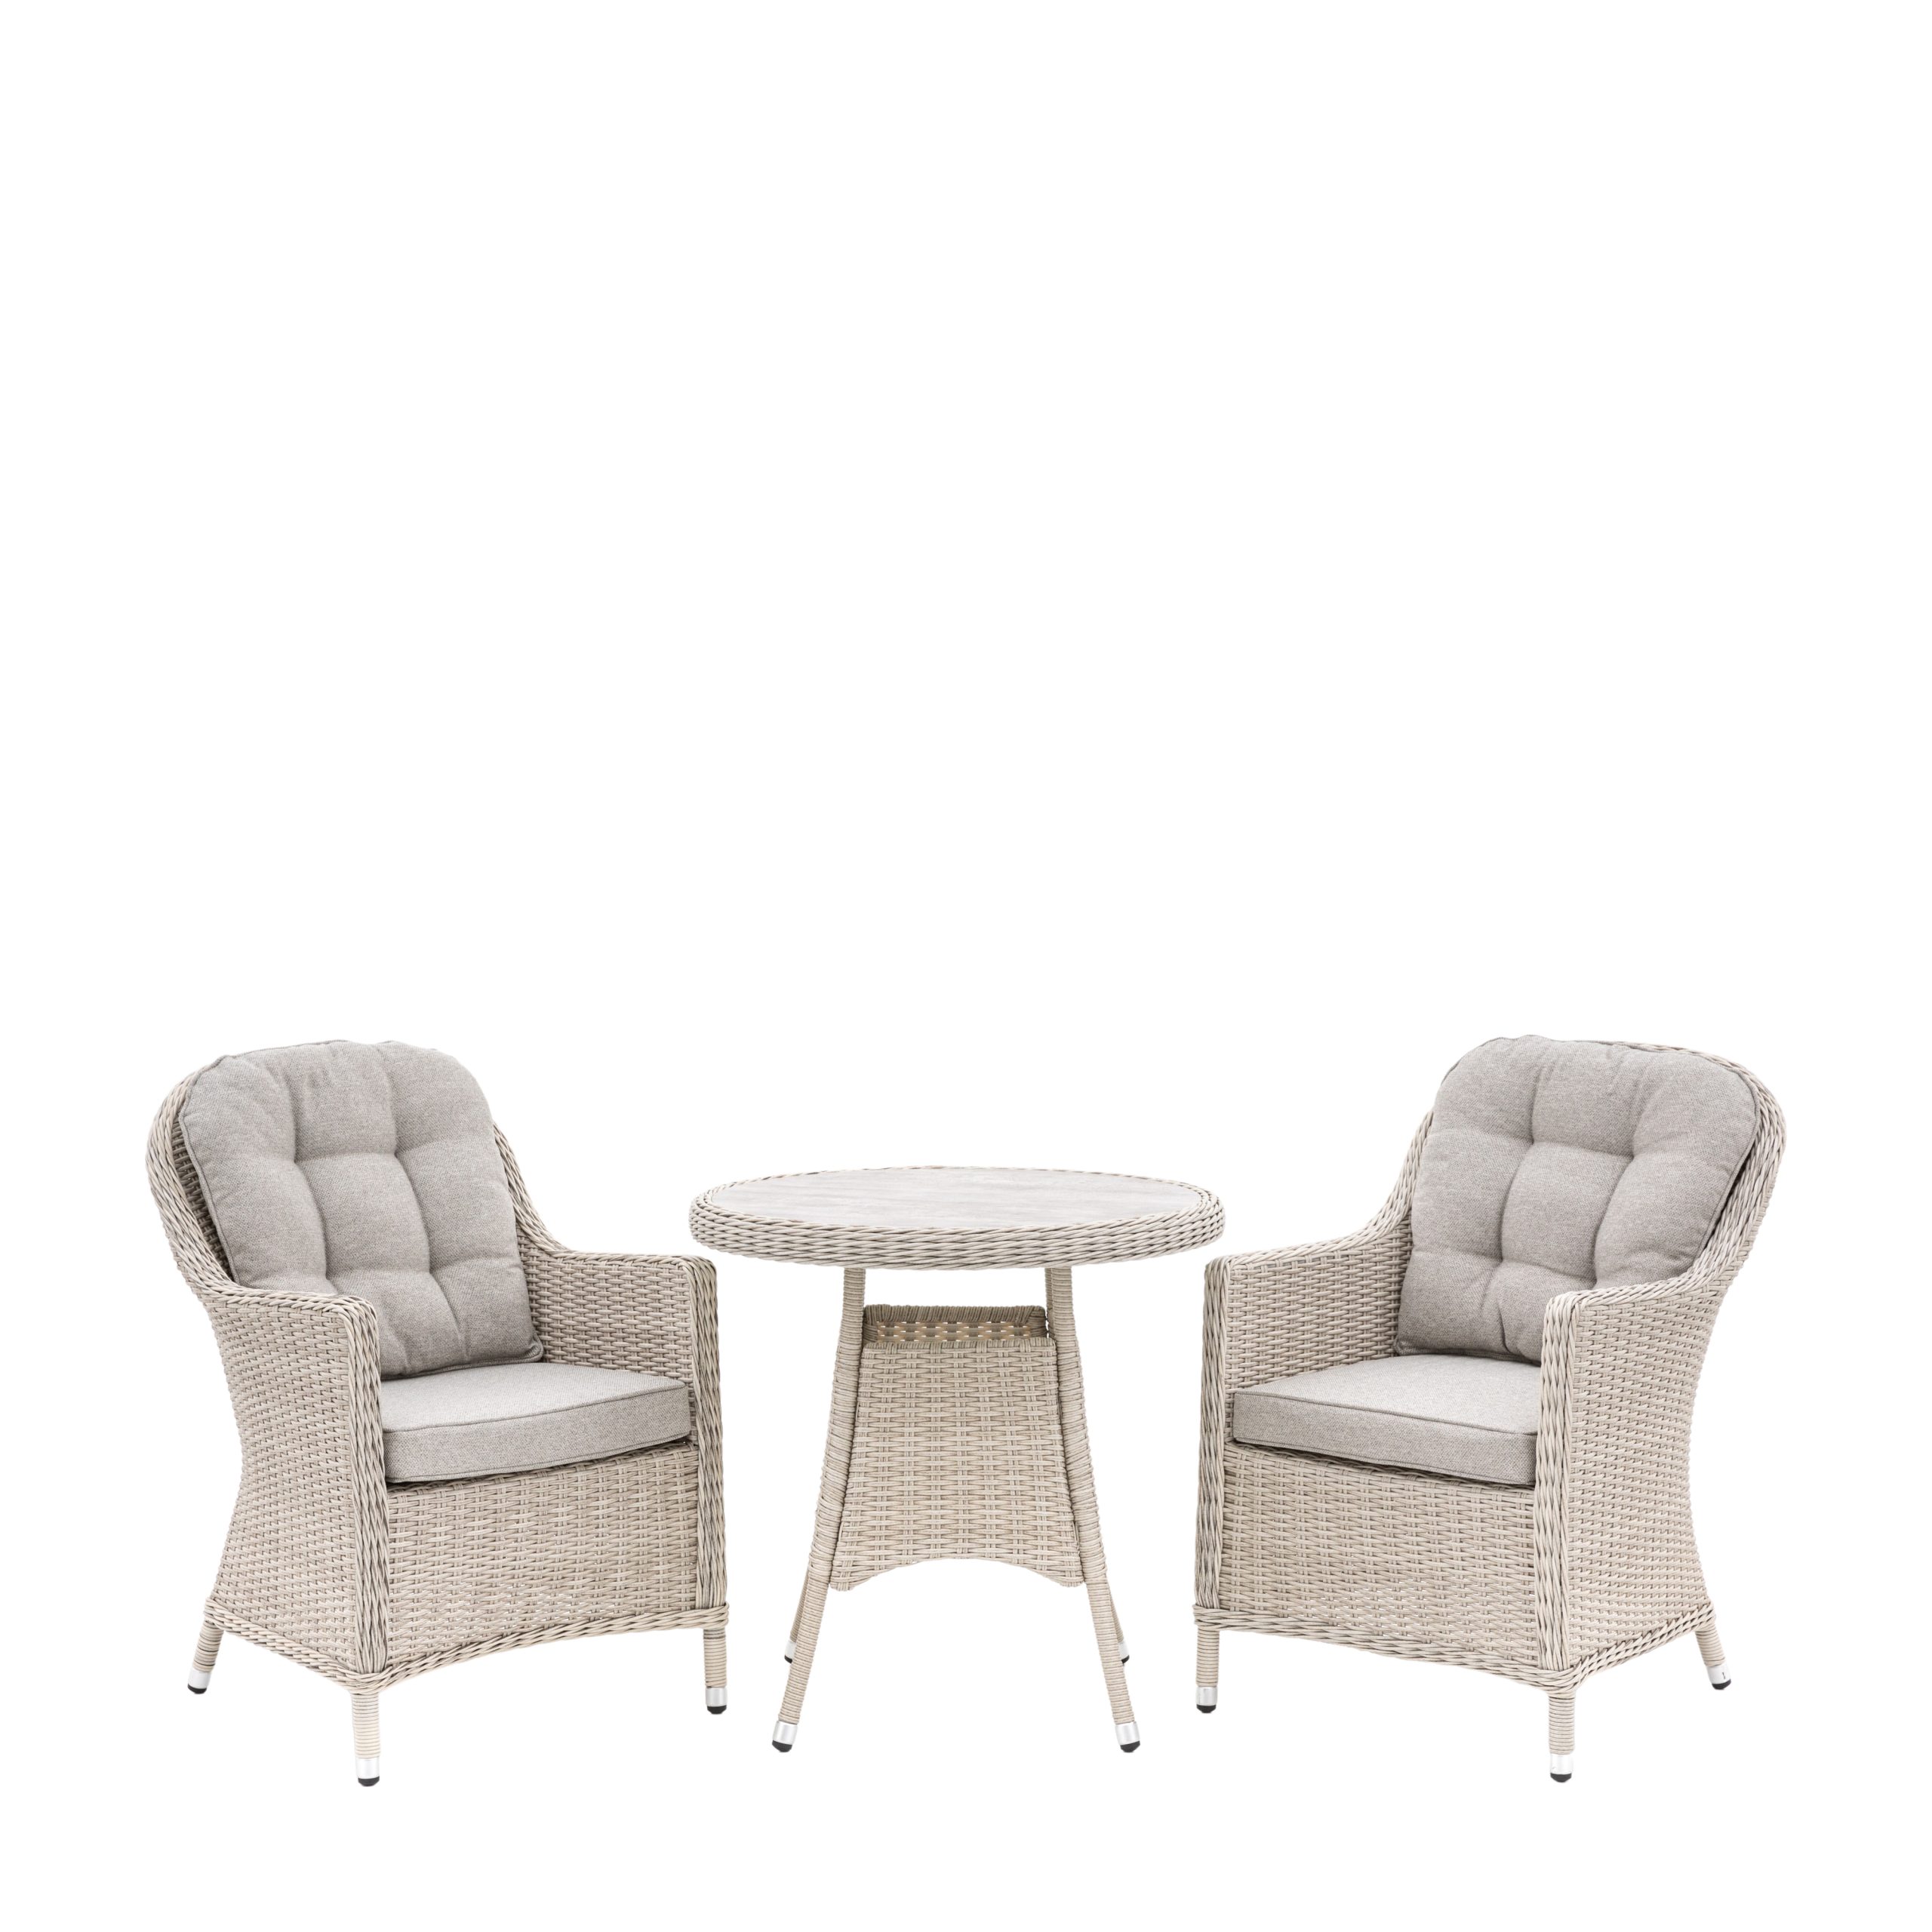 Gallery Direct Holton Bistro Set